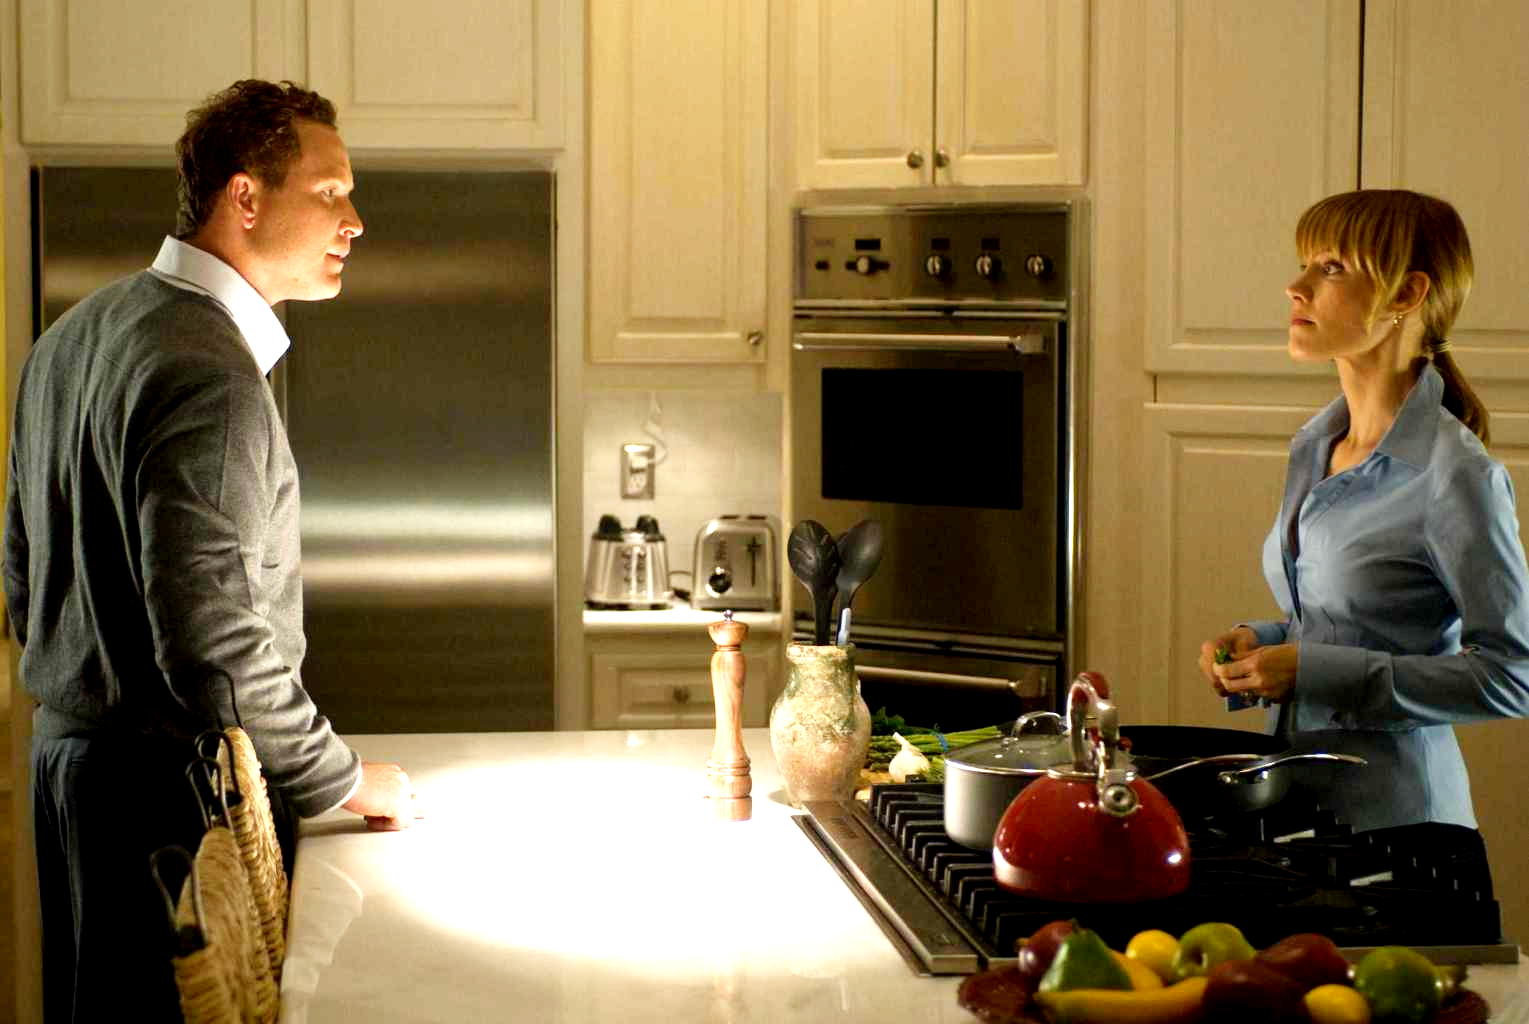 Cole Hauser stars as William Cartwright and KaDee Strickland stars as Jillian Cartwright in Lionsgate Films' The Family That Preys (2008). Photo credit by Alfeo Dixon.